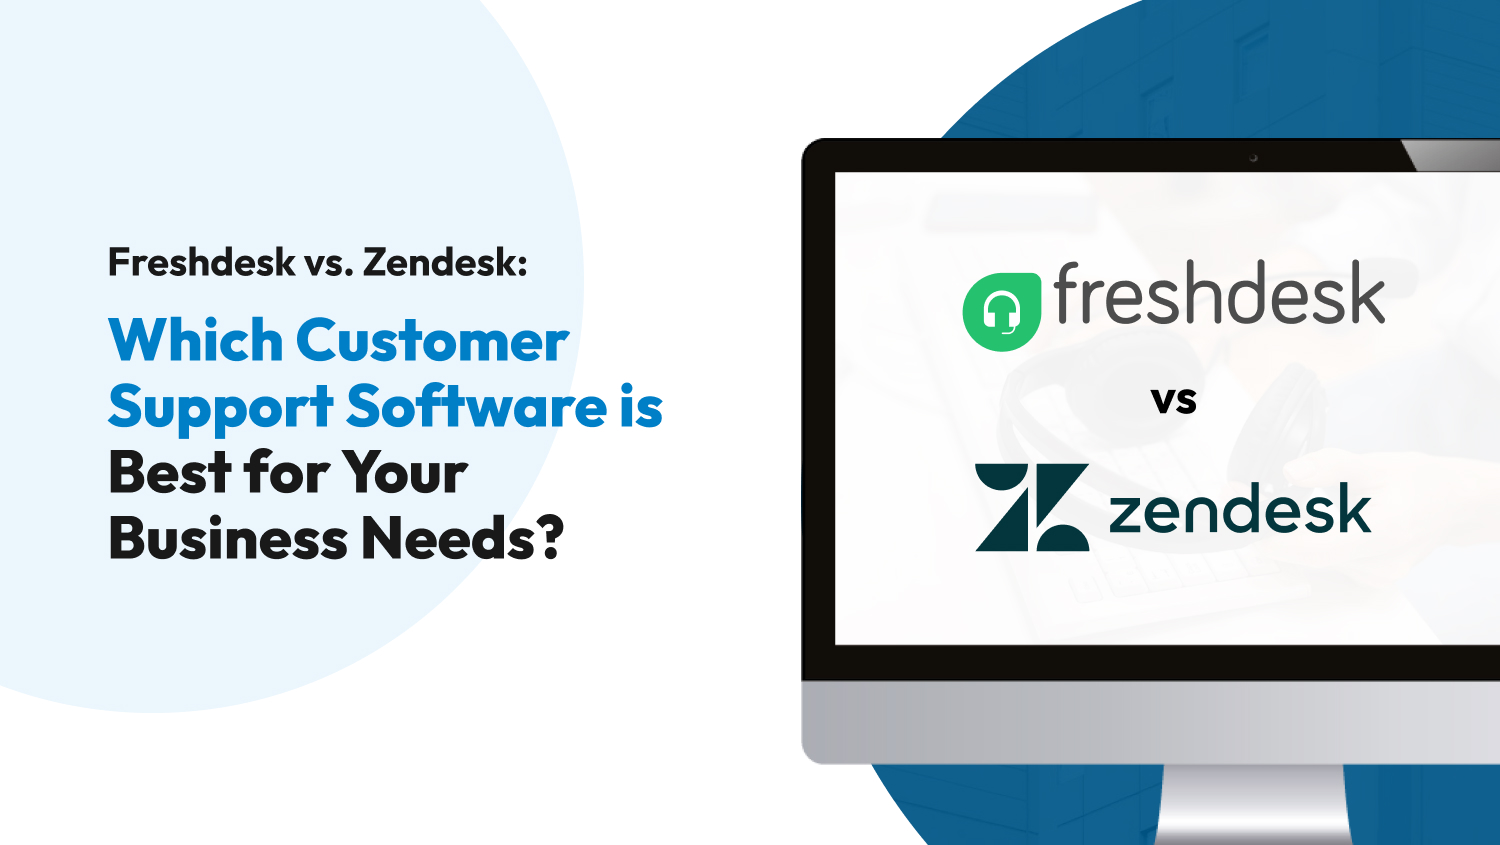 Freshdesk vs. Zendesk: Which Customer Support Software is Best for Your Business Needs?